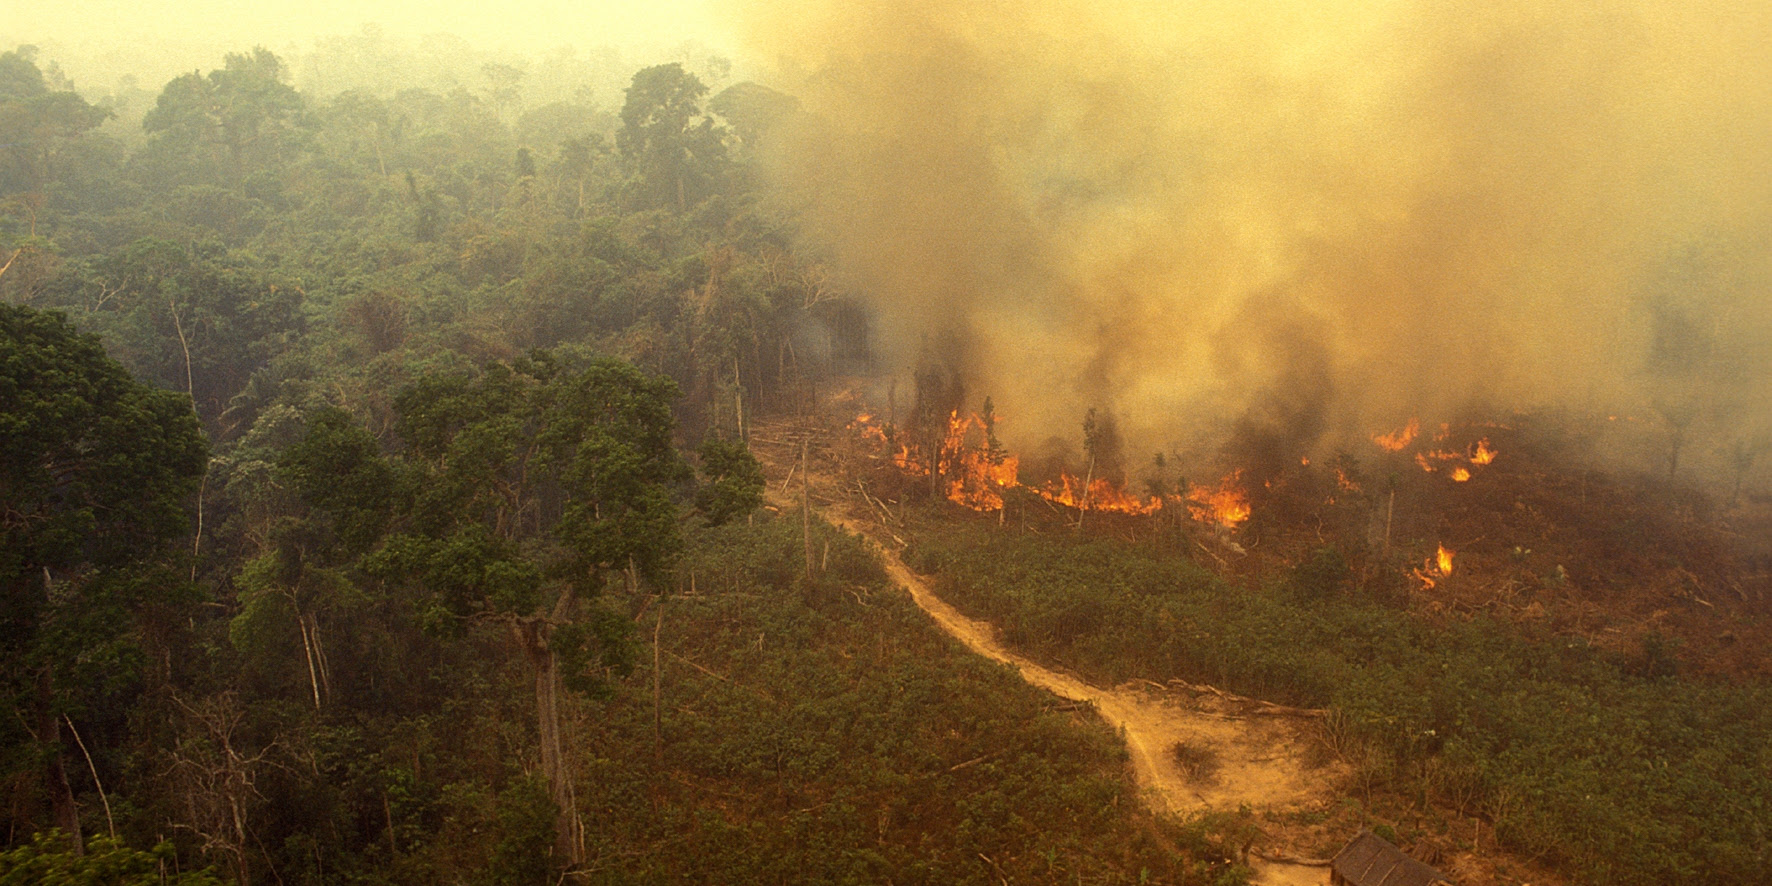 Yellow smoke rises from a part of the Amazon Rainforest as it burns